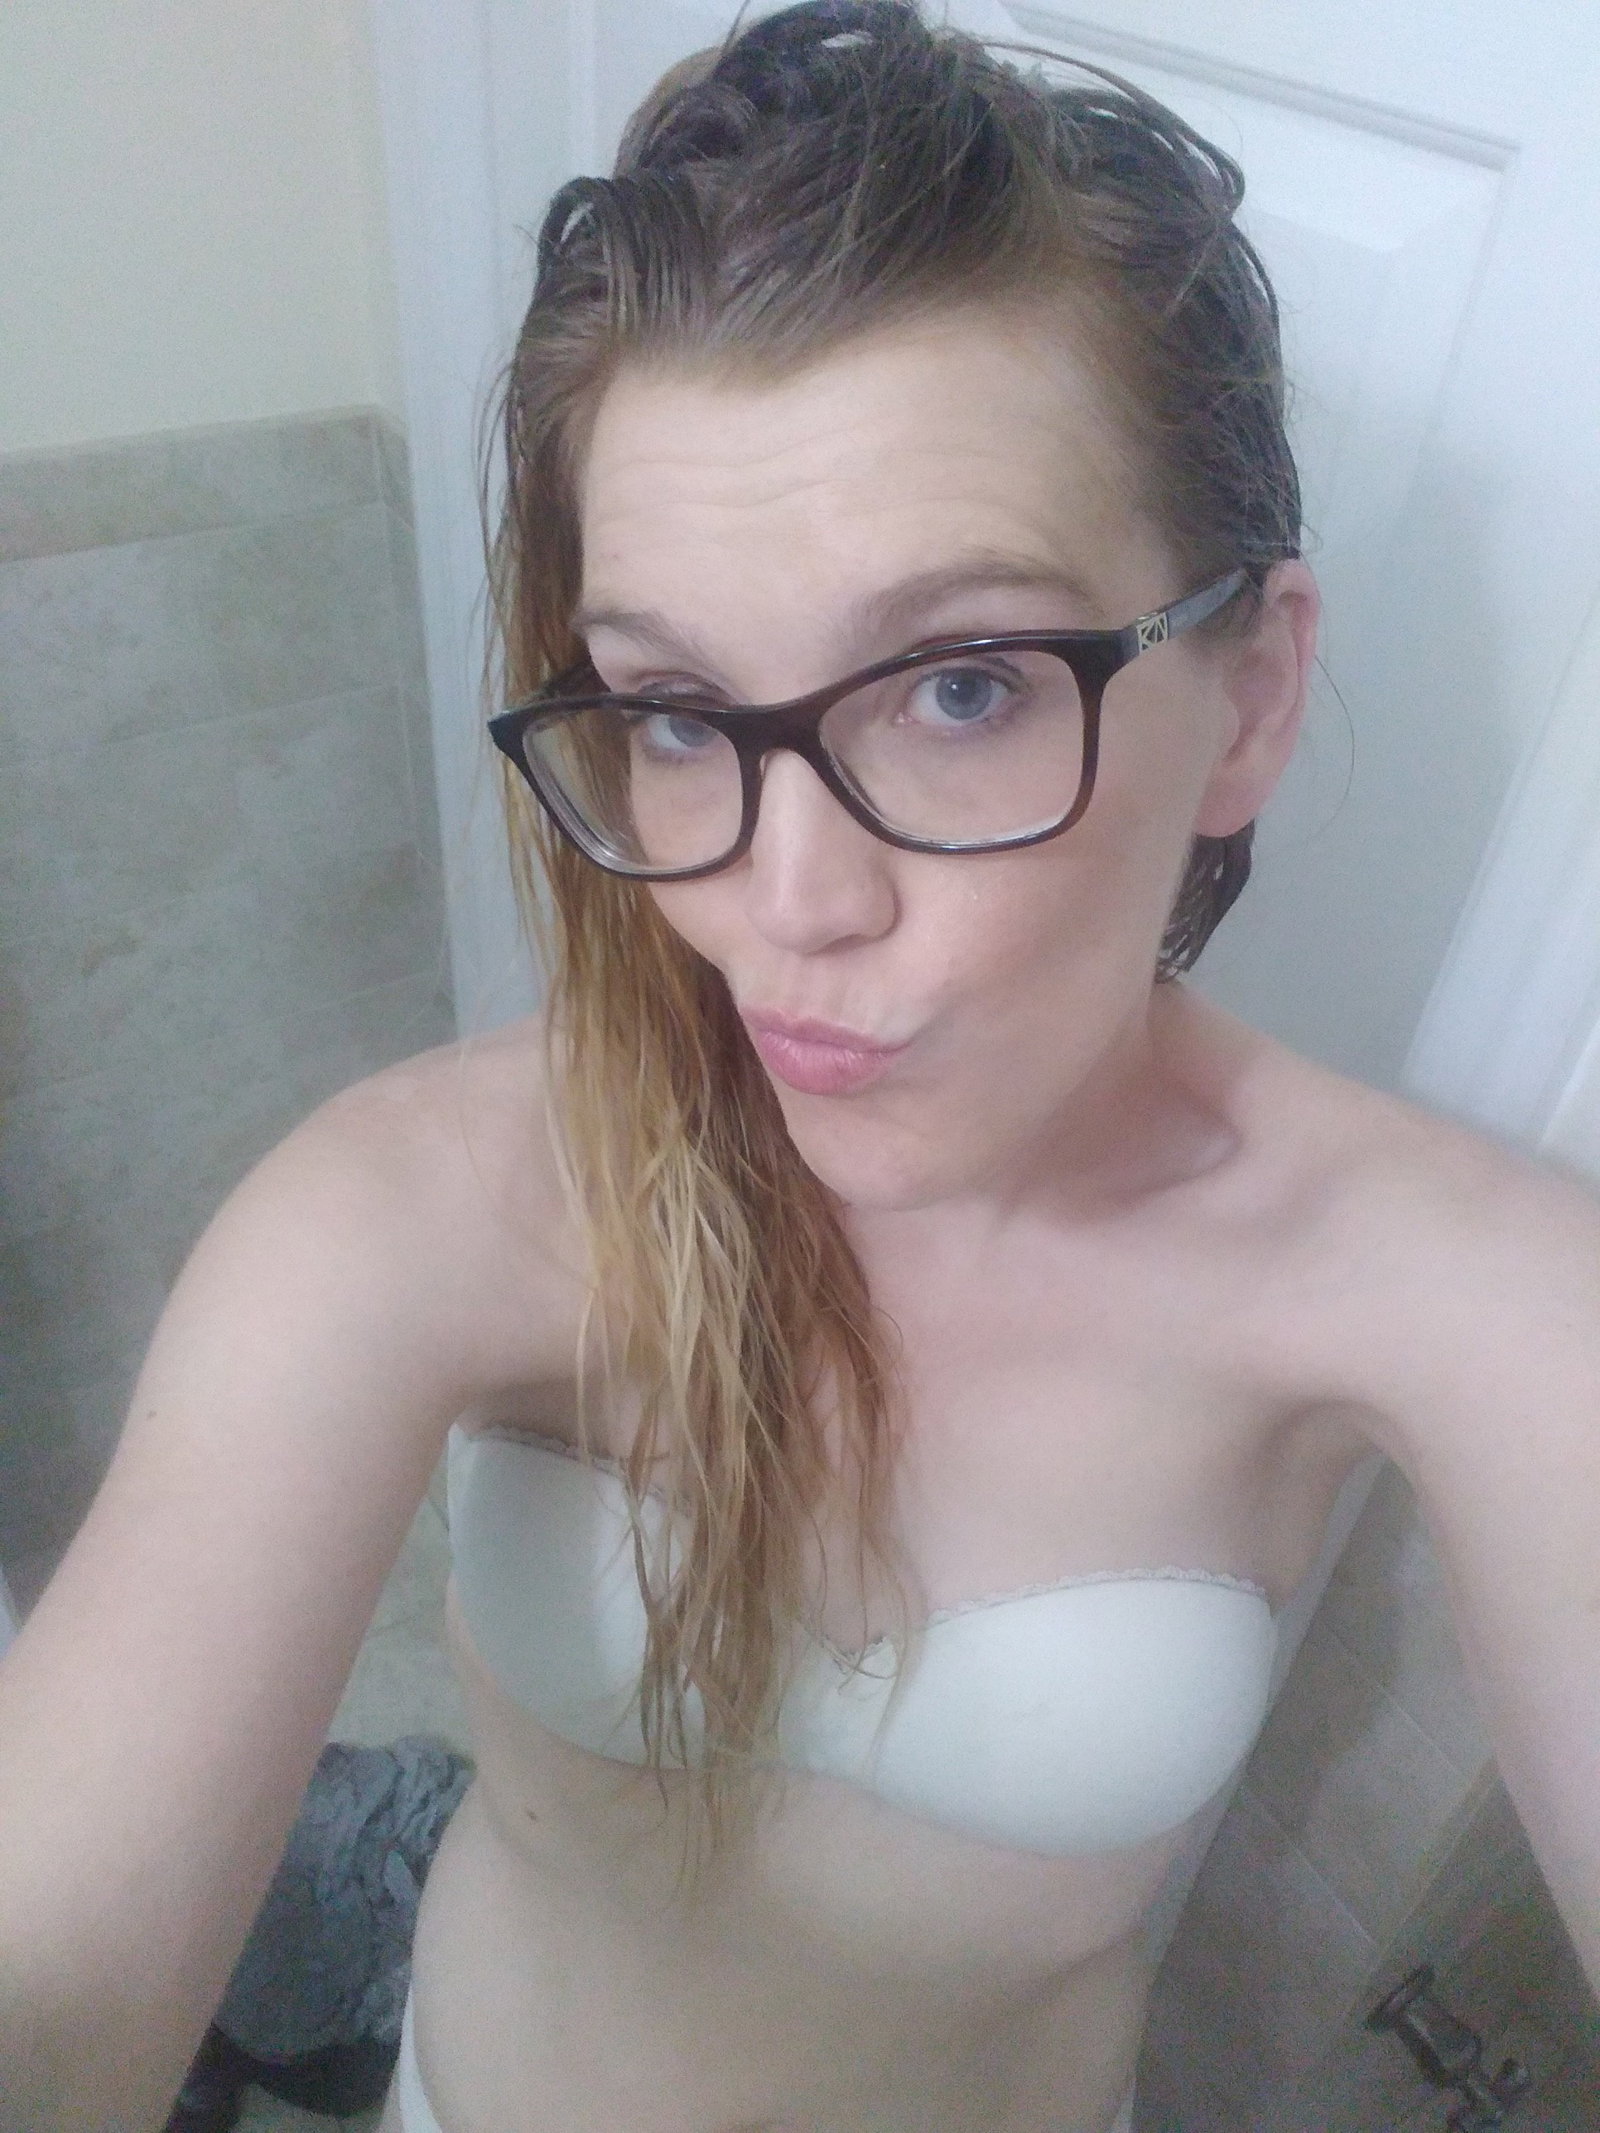 Photo by KatMcSass with the username @KatMcSass, who is a star user,  October 14, 2020 at 6:54 AM. The post is about the topic Skyprivate Promo and the text says 'Wet and ready, catch me on Skyprivate ;) https://profiles.skyprivate.com/models/p6wo-katmcsass.html'